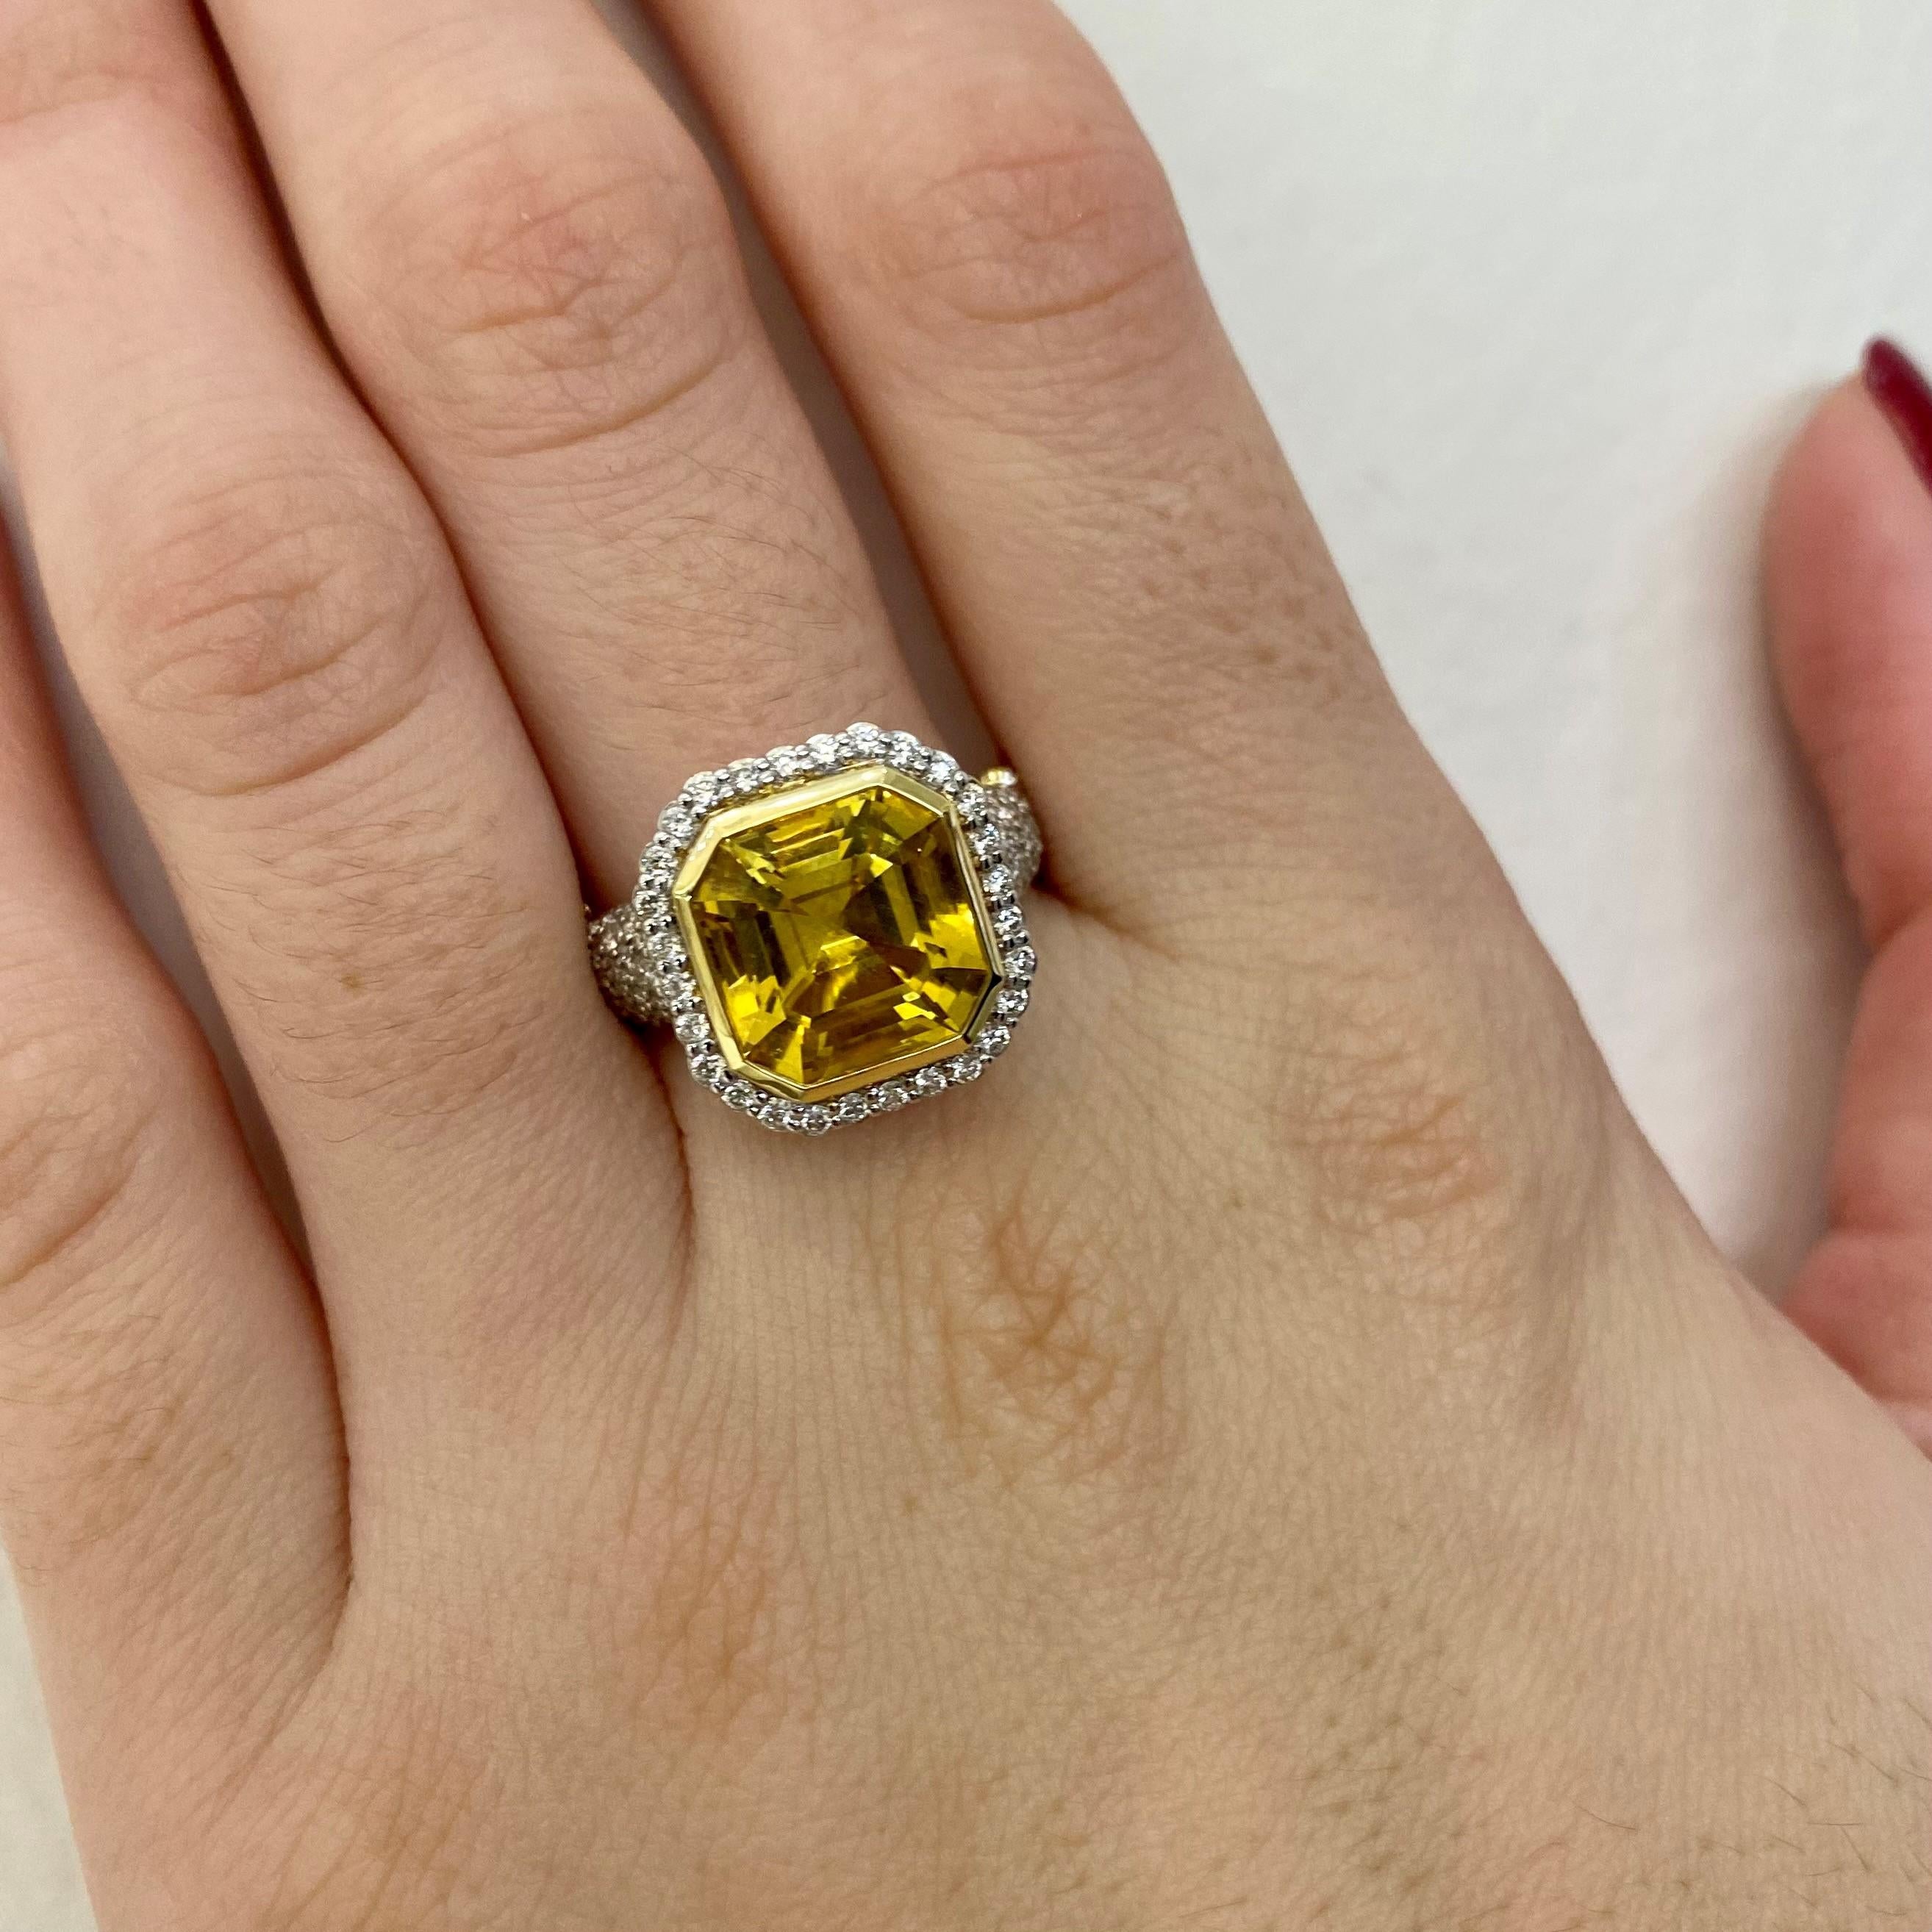 Women's Sloane Street One-of-a-Kind Yellow Beryl Cocktail Ring For Sale